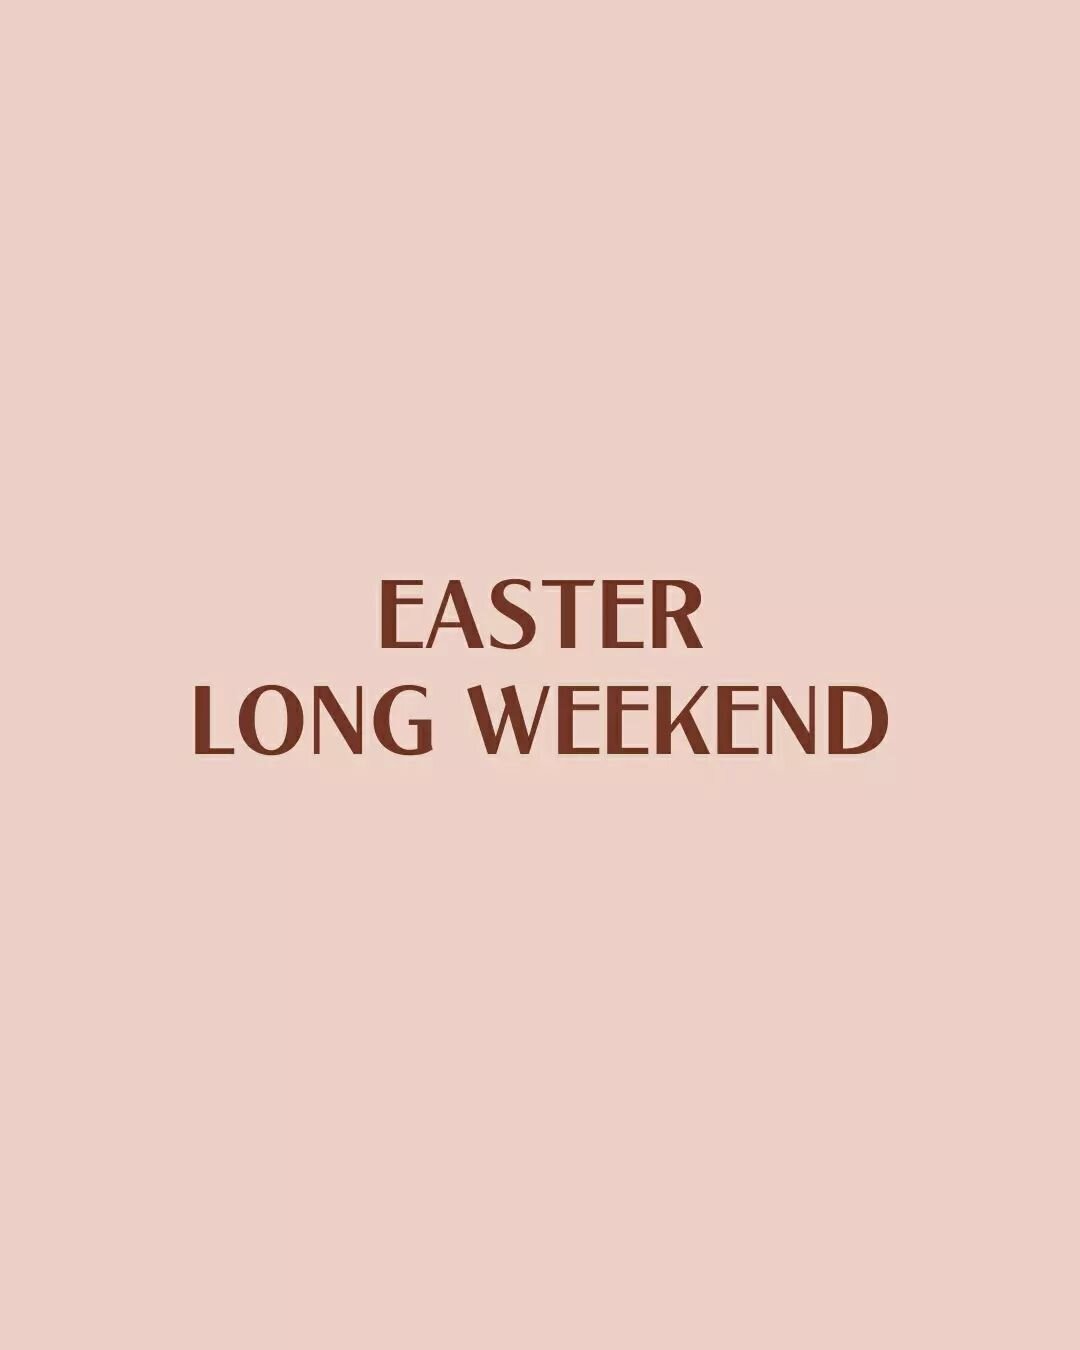 Ciao! Cecchi's will be closed on Good Friday. Open on Saturday 30 March from 12pm till late!&nbsp;

Closed Sunday and Monday as usual.